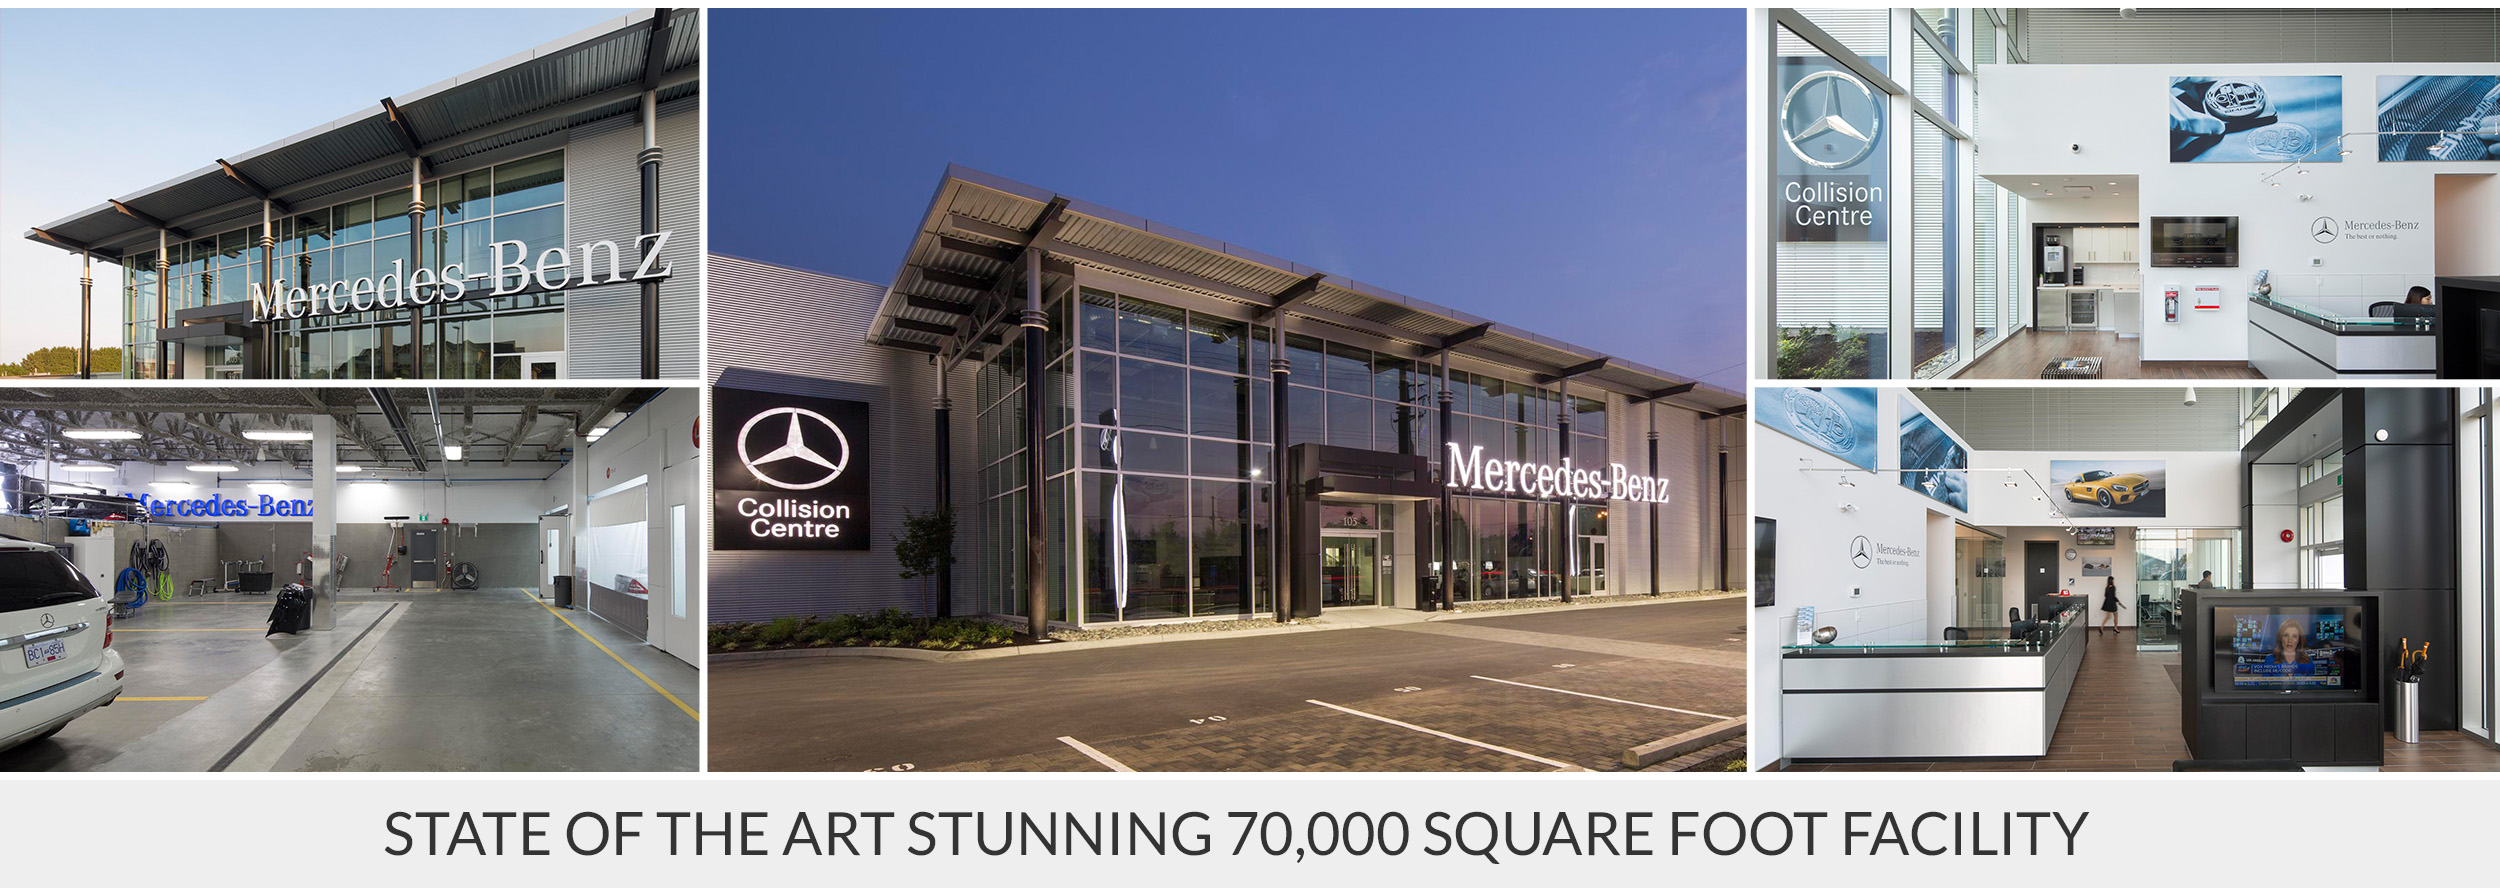 Mercedes-Benz Collision Centre's auto body shop and offices.